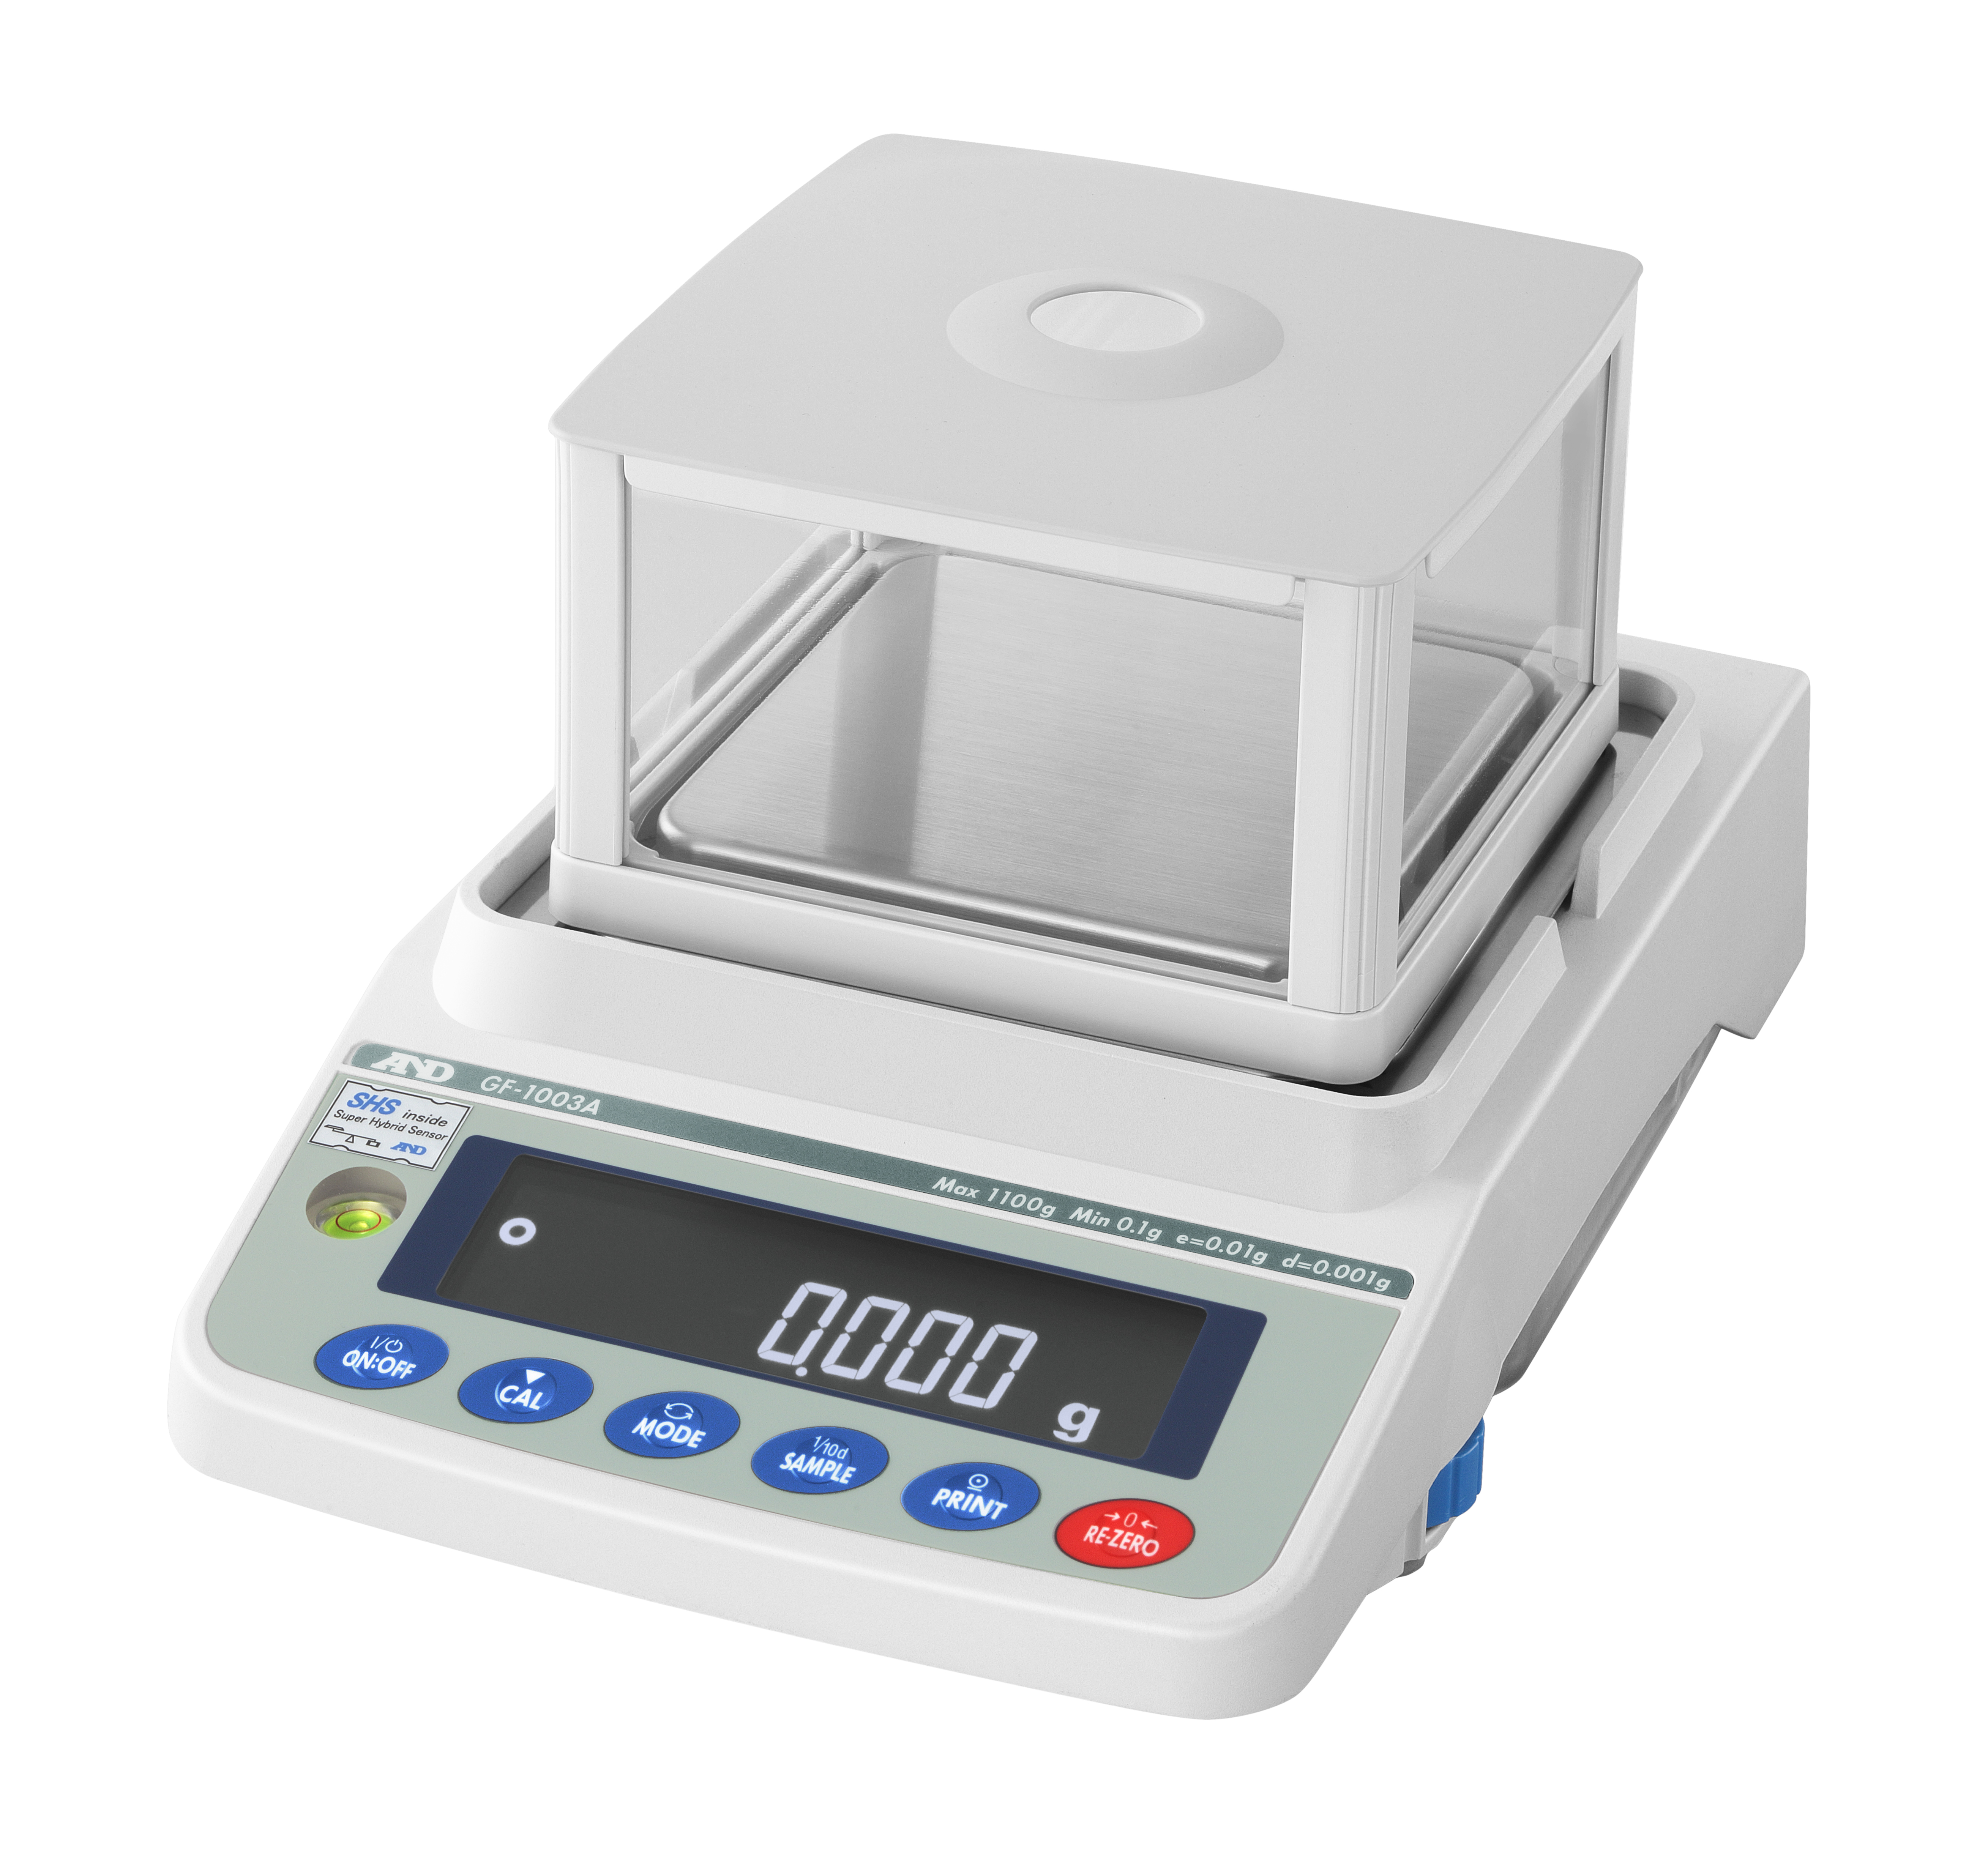 0.0001 g Apollo Analytical Balance with Internal Calibration A&D Weighing GX-124A 122 g 5 Year Warranty 